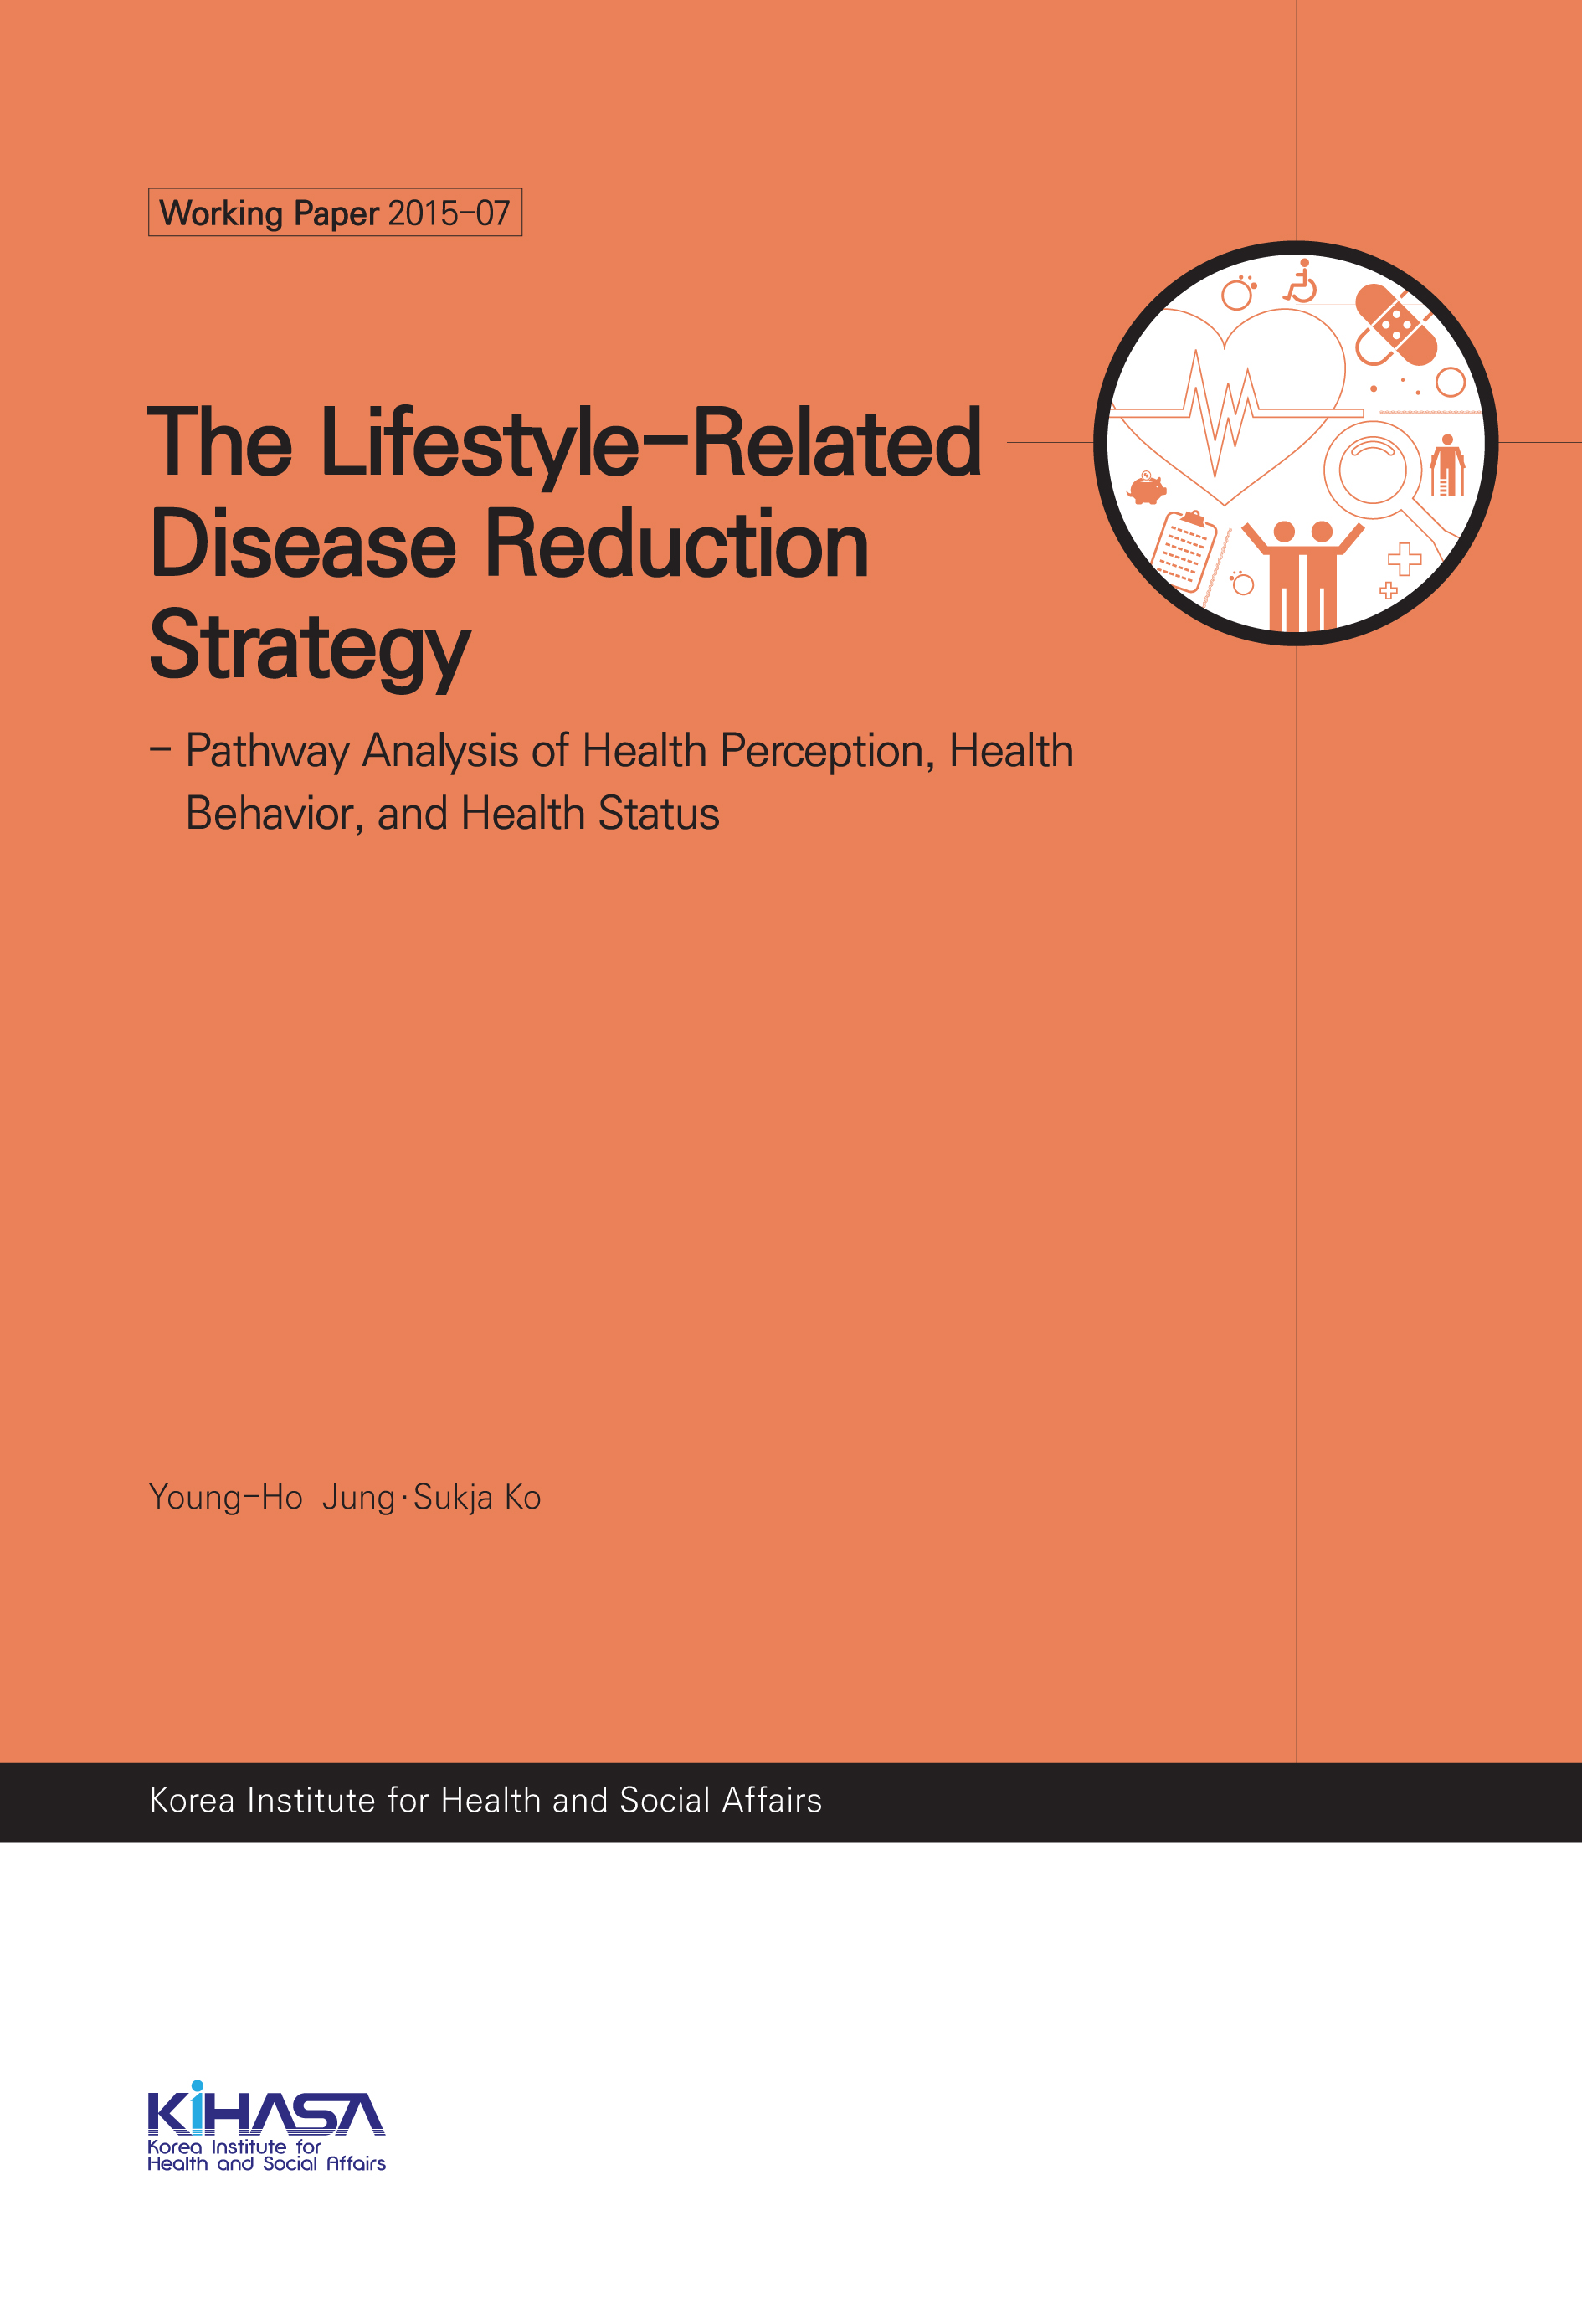 The Lifestyle-Related Disease Reduction Strategy - Pathway Analysis of Health Perception, Health Behavior, and Health Status